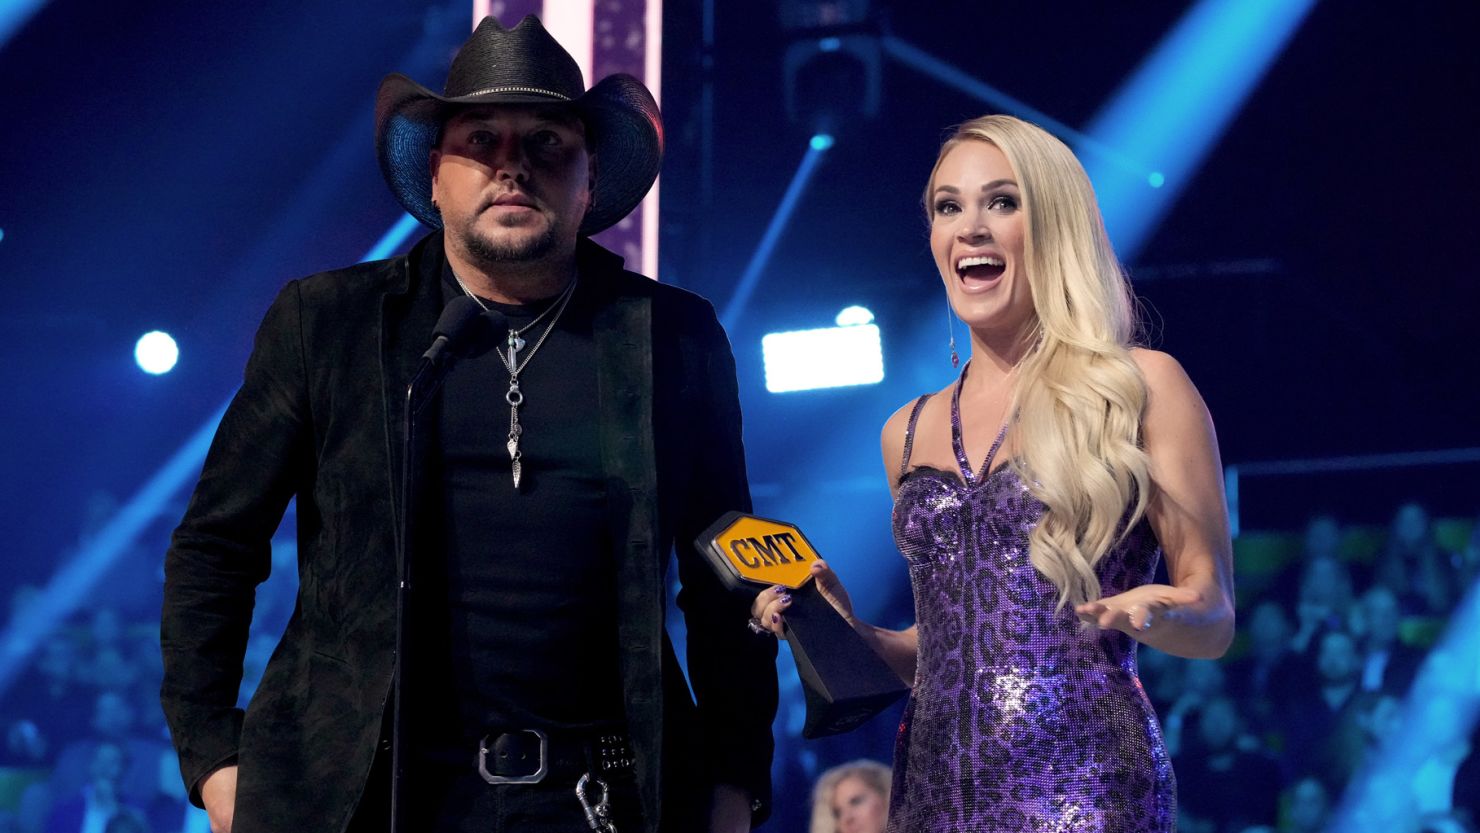 Jason Aldean and Carrie Underwood accept an award for collaborative video of the year onstage at the 2022 CMT Music Awards on Monday.